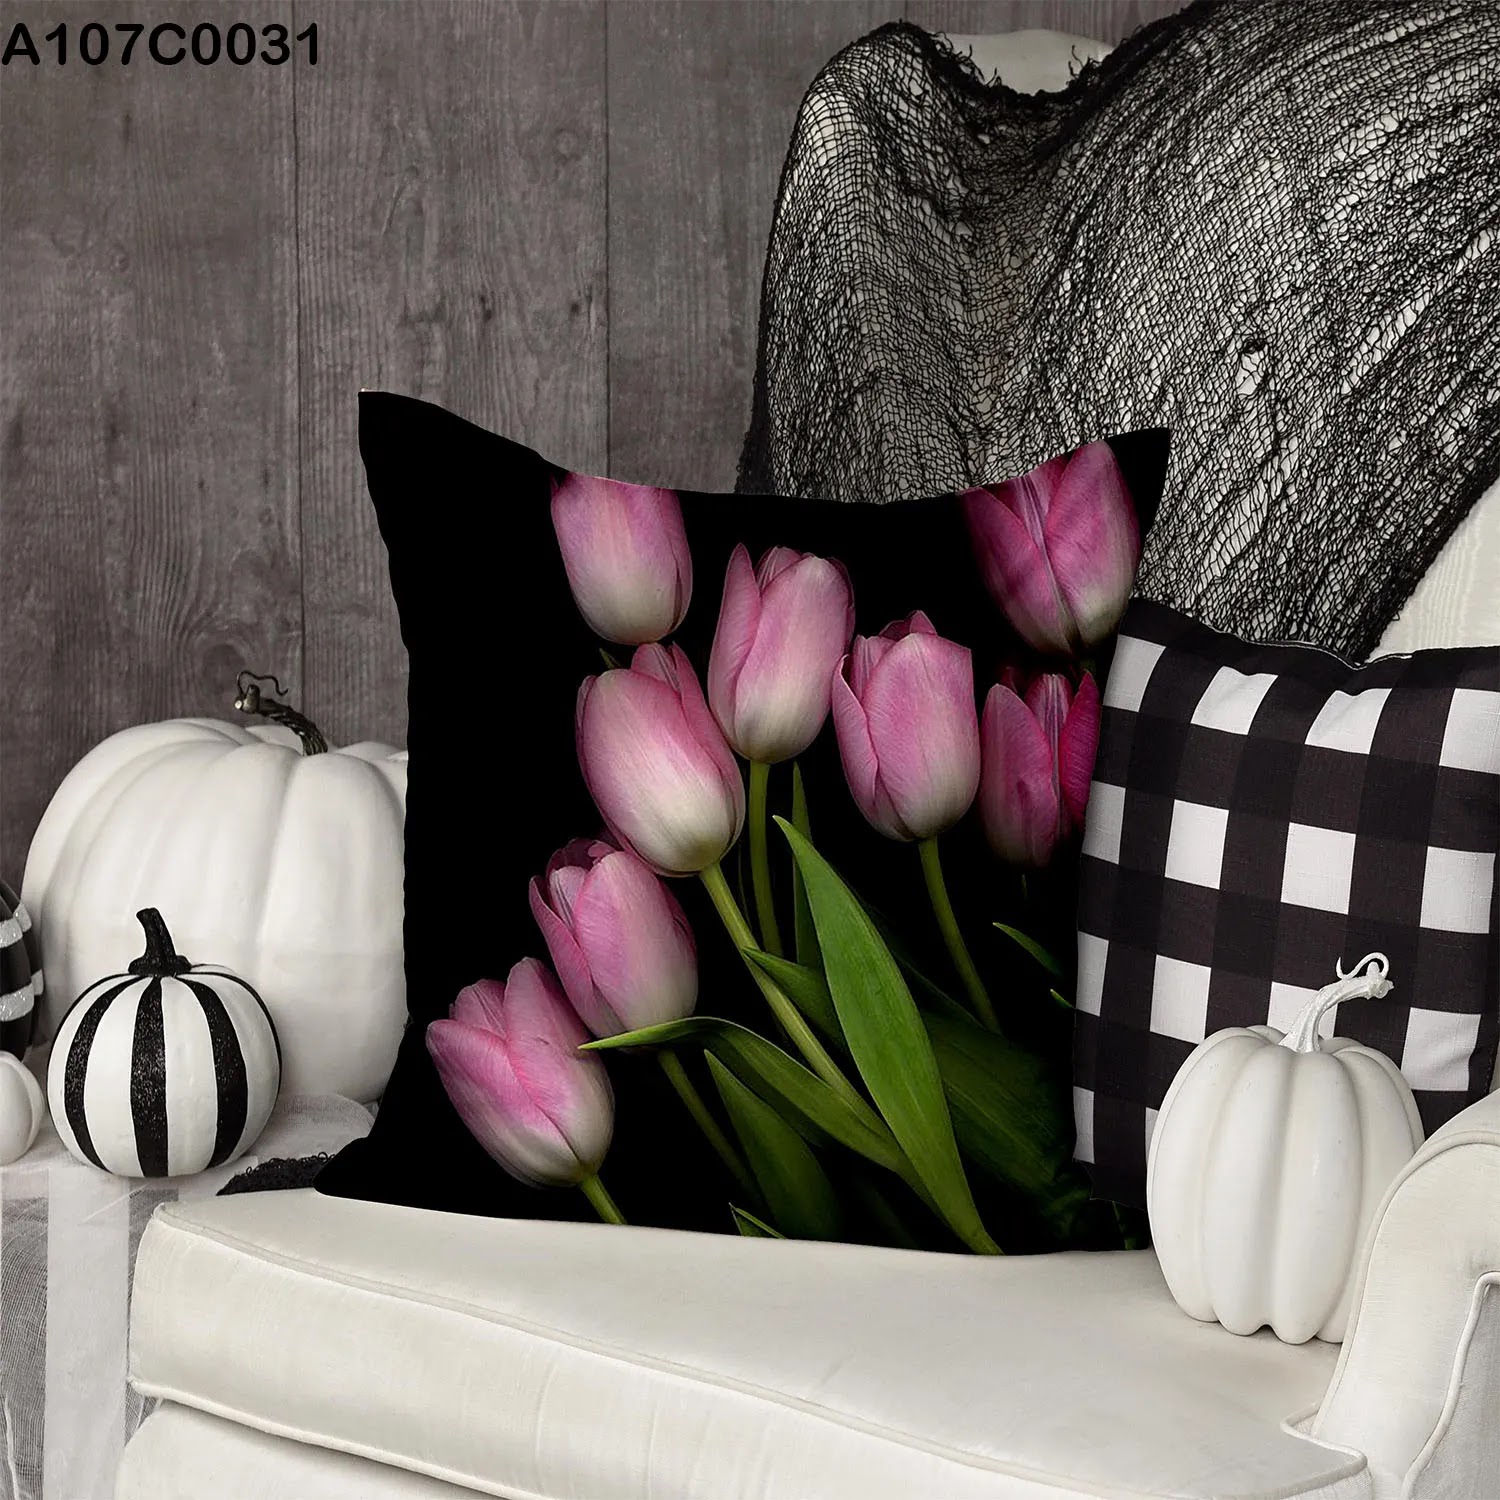 Black pillow case with pink tulips